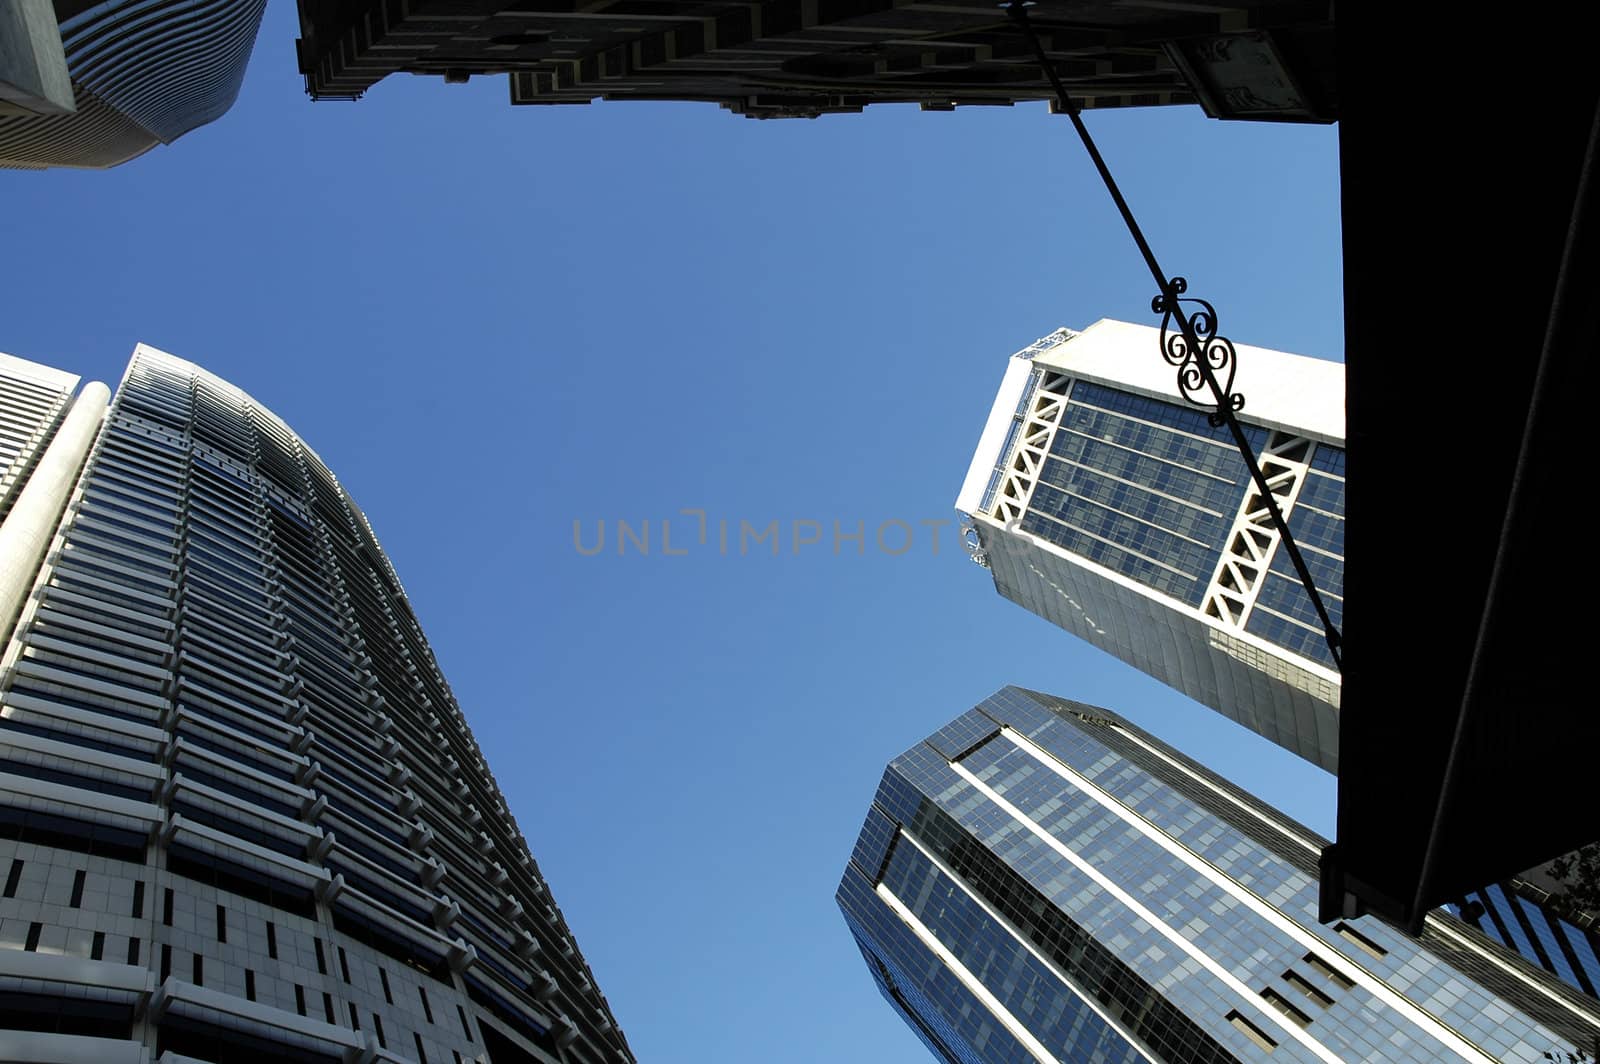 several modern skyscrapers, photo taken underneath one of them, clear blue sky